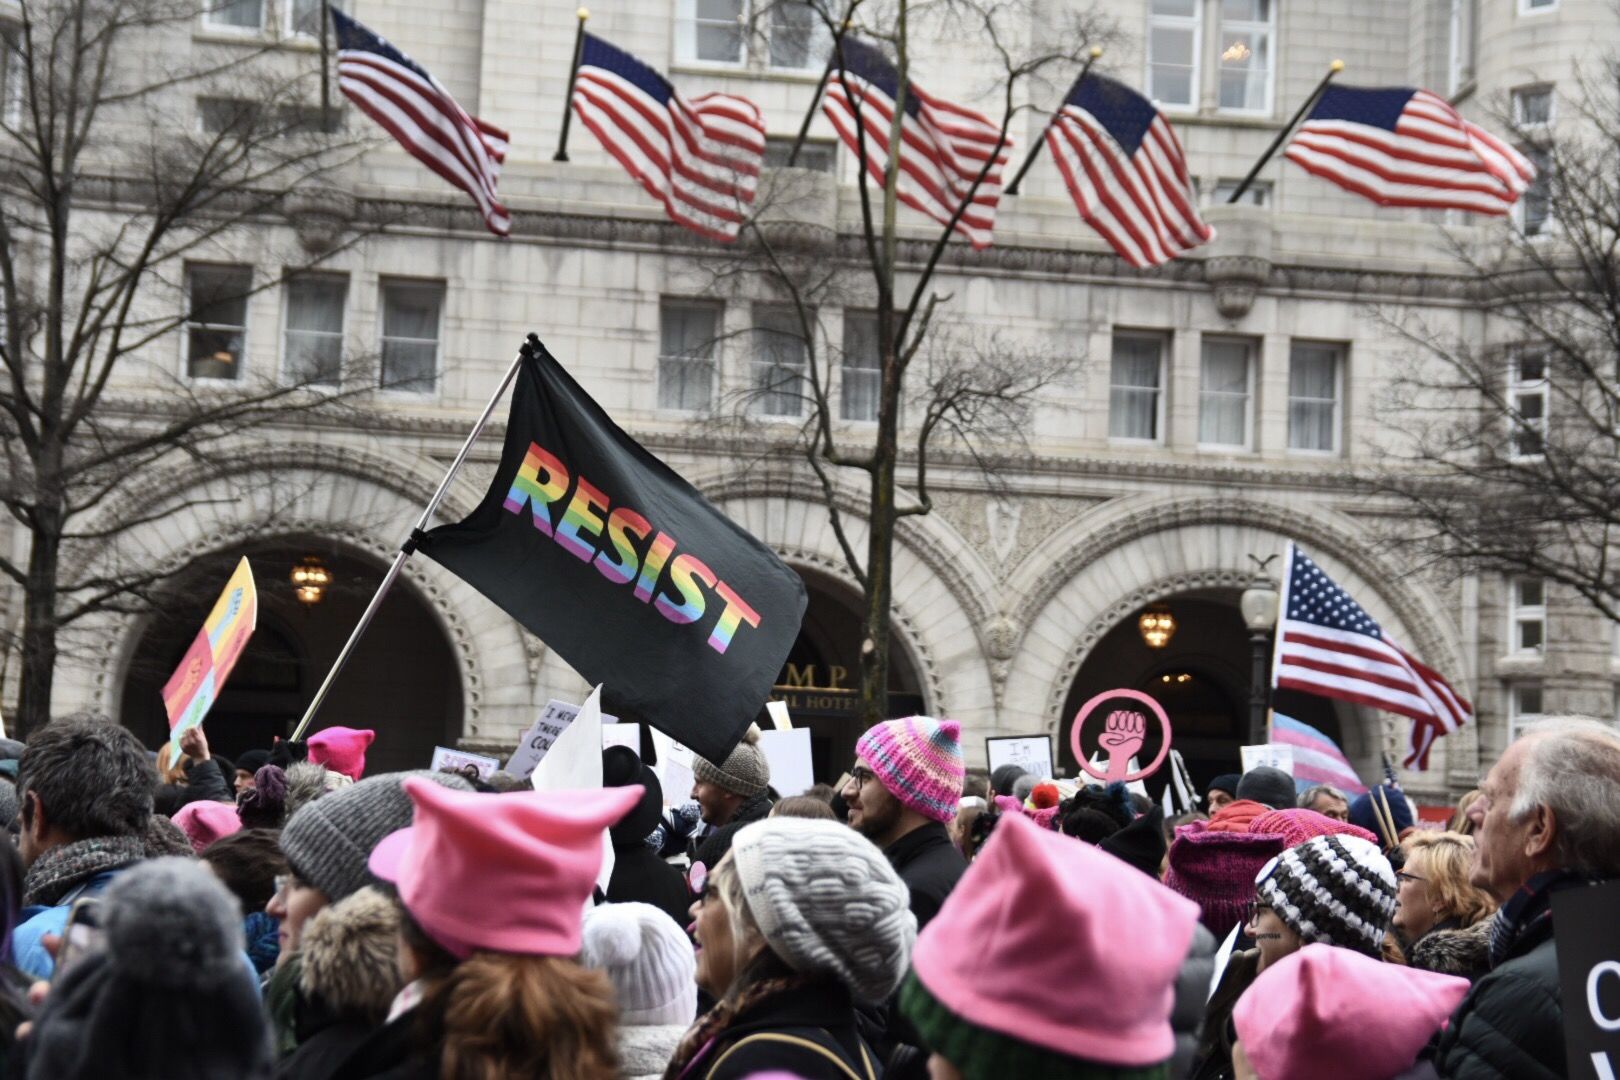 The 2019 Women’s March passed directly in front of the Trump International Hotel — a common site for protesters seeking to express their frustration and misgivings with President Trump. The half-mile march featured thousands of people, including some furloughed federal workers, advocating for women’s rights and calling for Trump’s removal from office. (WTOP/Alejandro Alvarez)